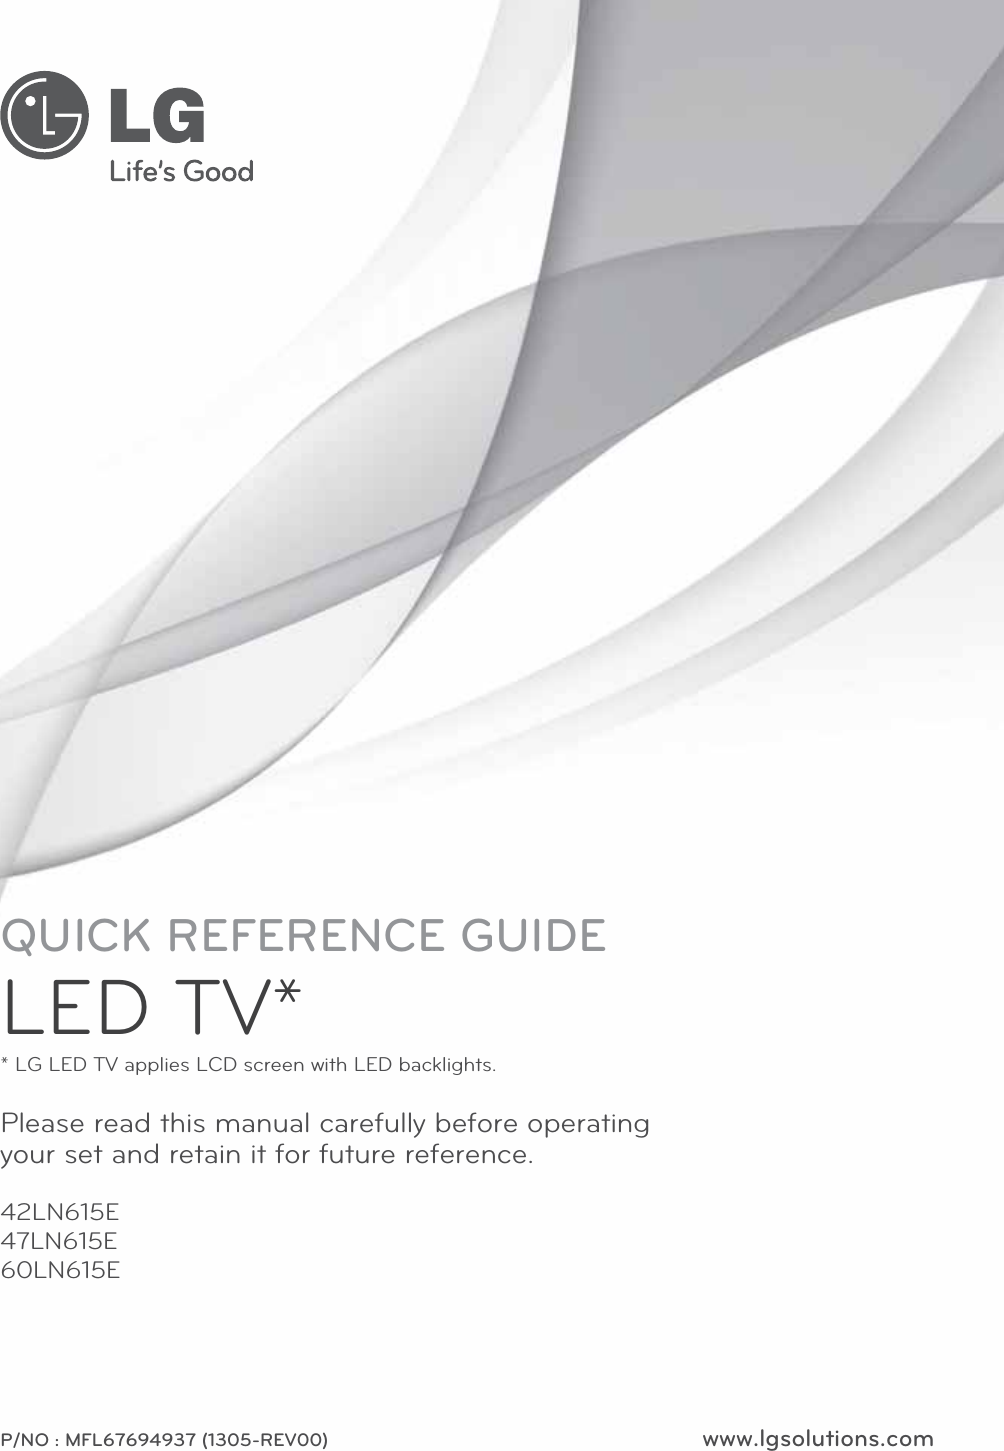 www.lgsolutions.comP/NO : MFL67694937 (1305-REV00)42LN615E47LN615E60LN615EPlease read this manual carefully before operating your set and retain it for future reference.QUICK REFERENCE GUIDELED TV** LG LED TV applies LCD screen with LED backlights.